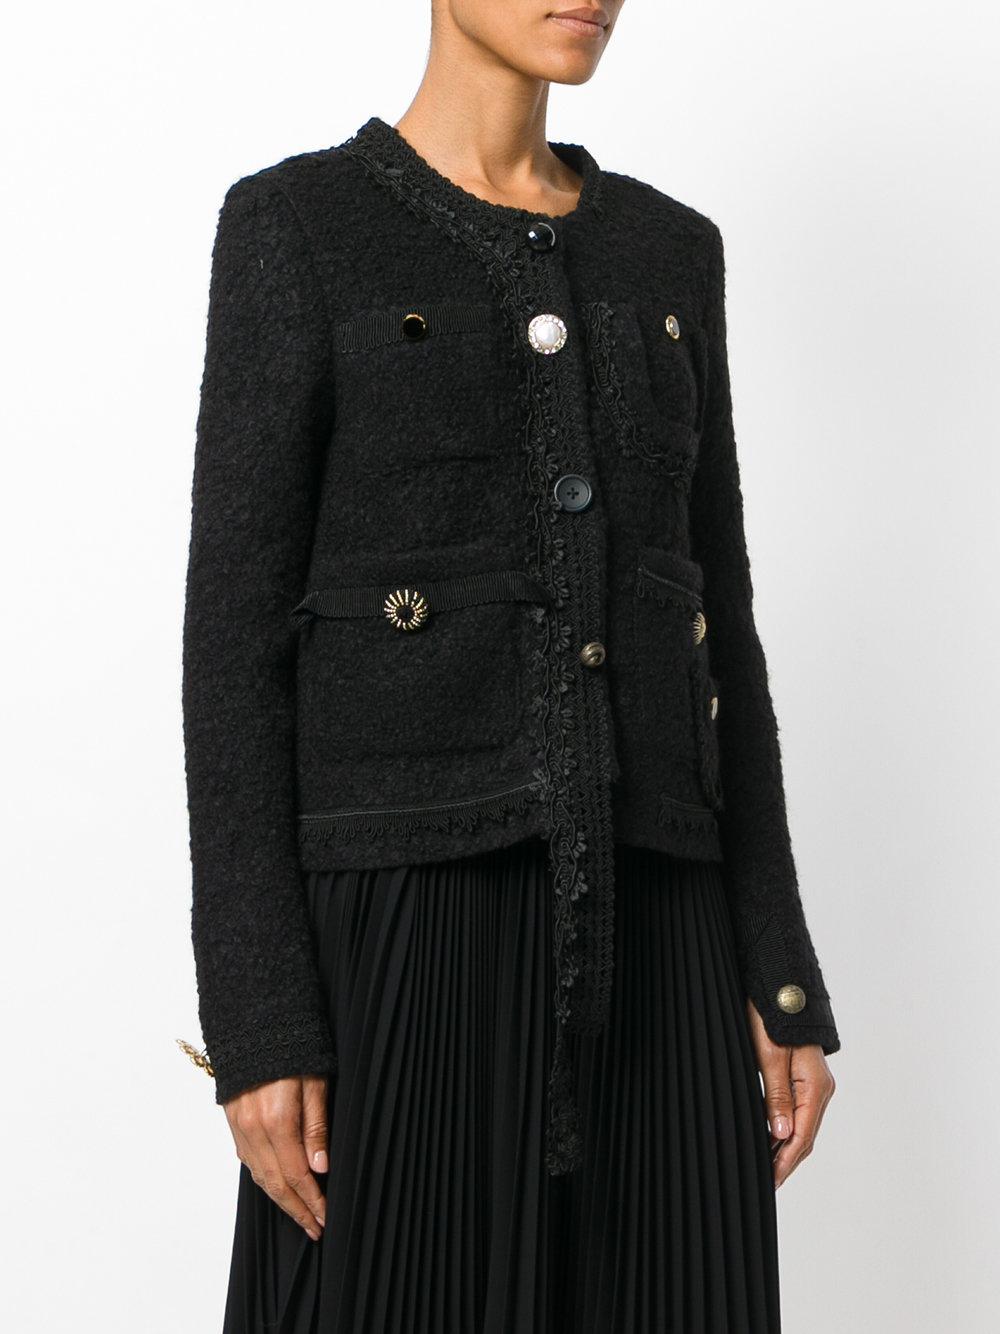 Erika Cavallini Semi Couture Fitted Lace Appliqué Jacket in Black - Lyst